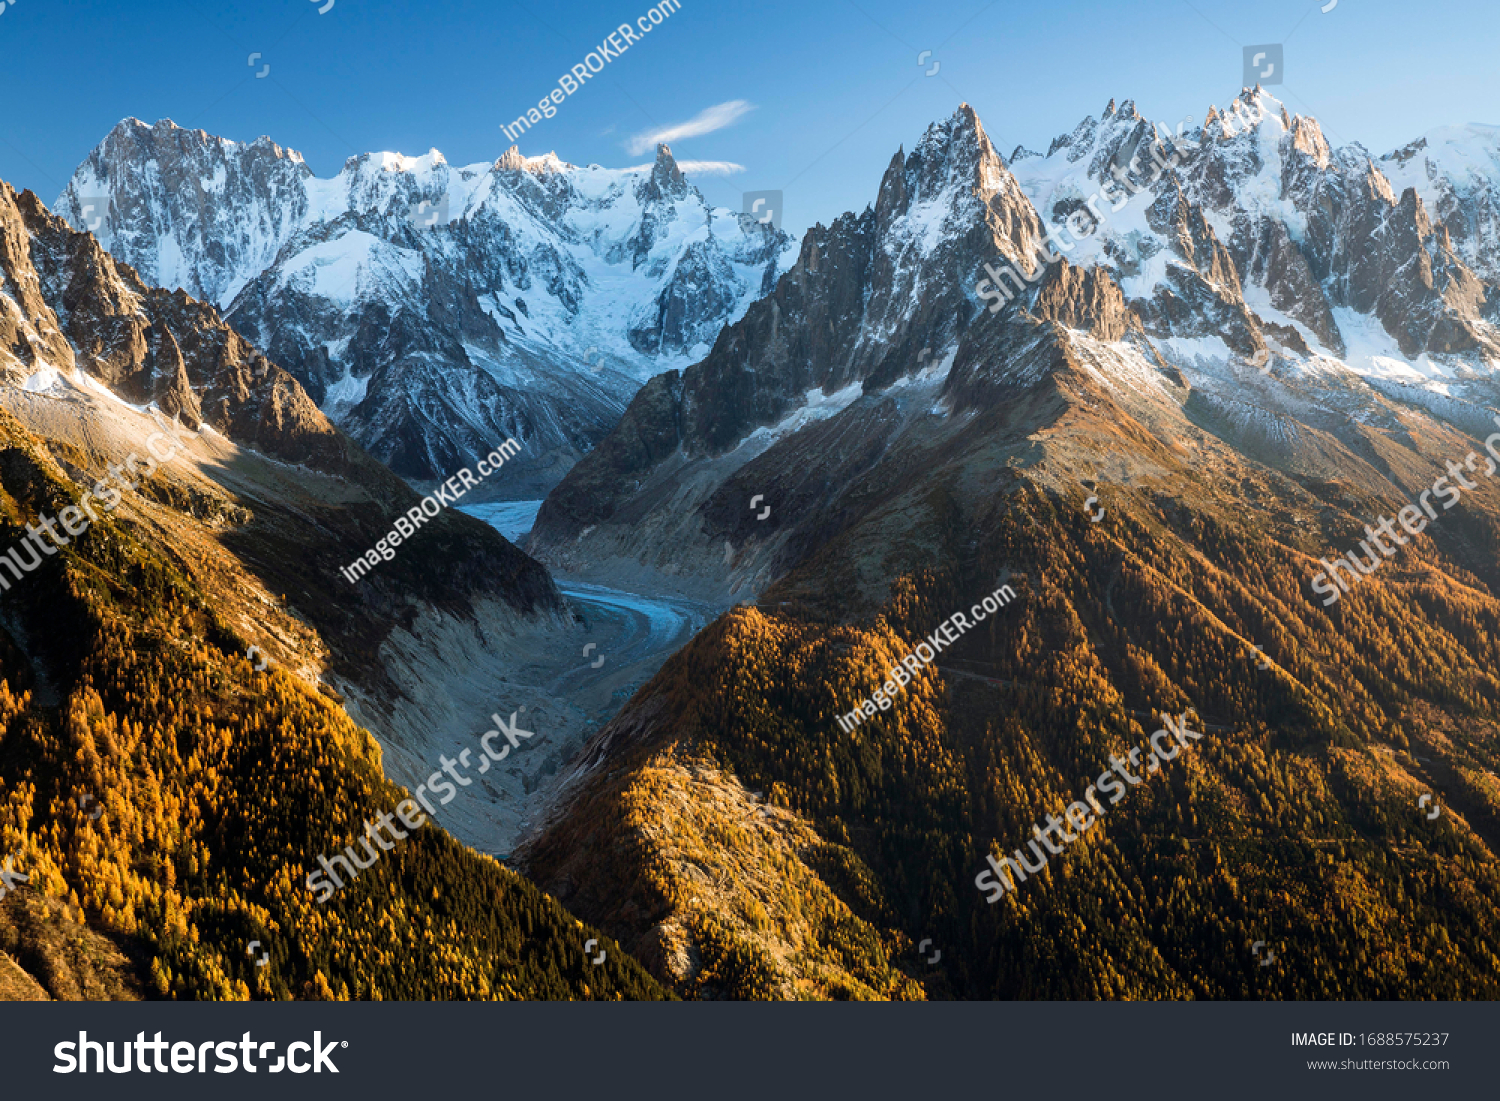 Mont Blanc massif with the Mer de Glace glacier in Chamonix, Alps, France #1688575237